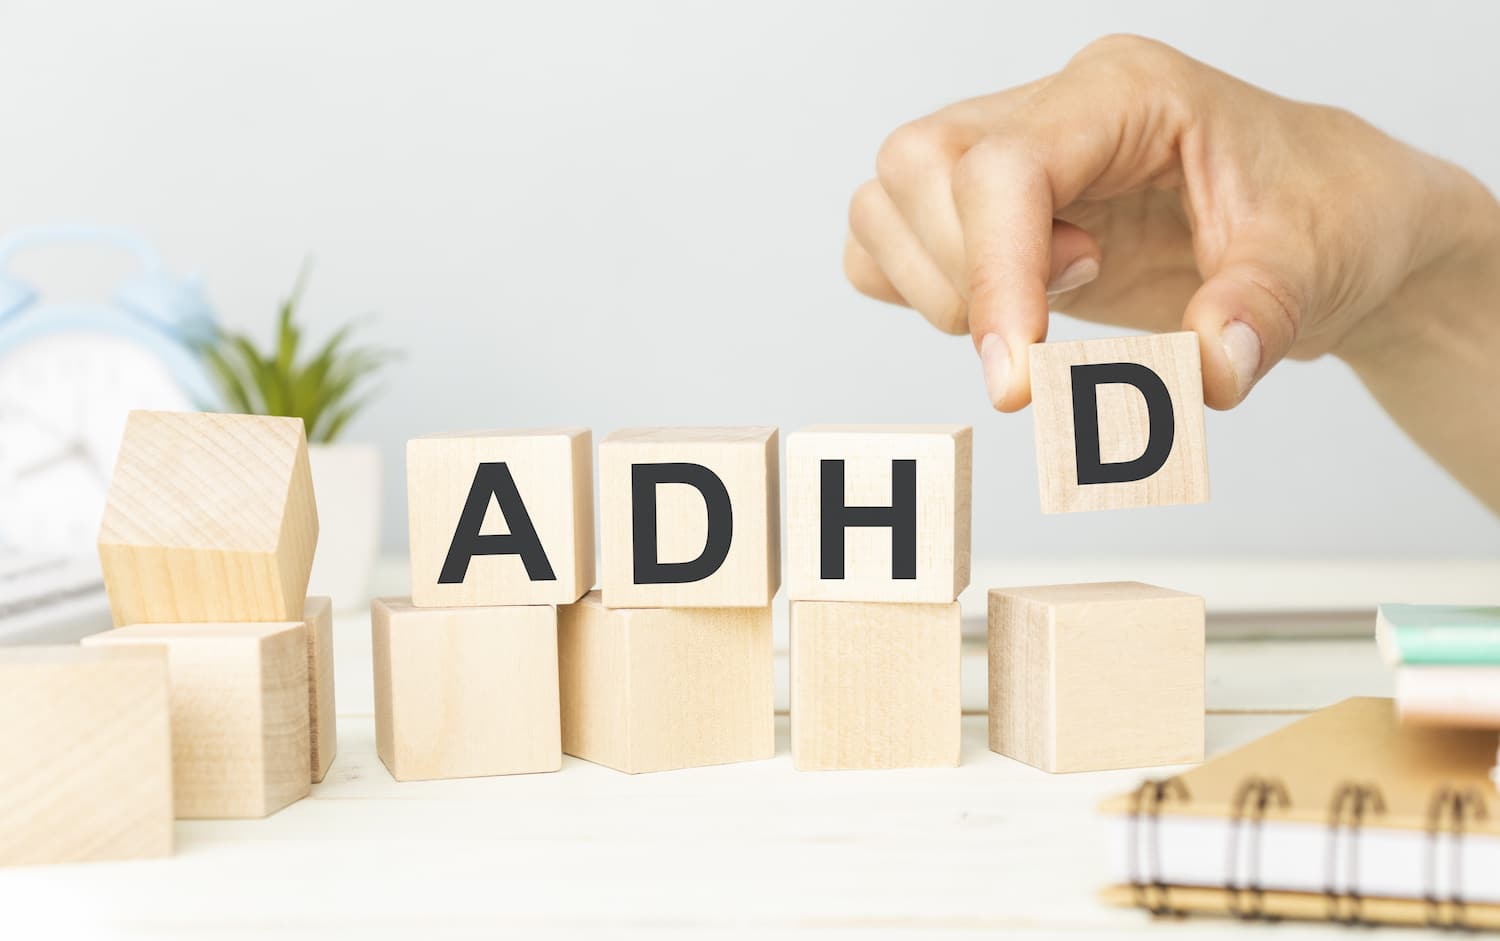 Plant extracts, vitamins and minerals for ADHD